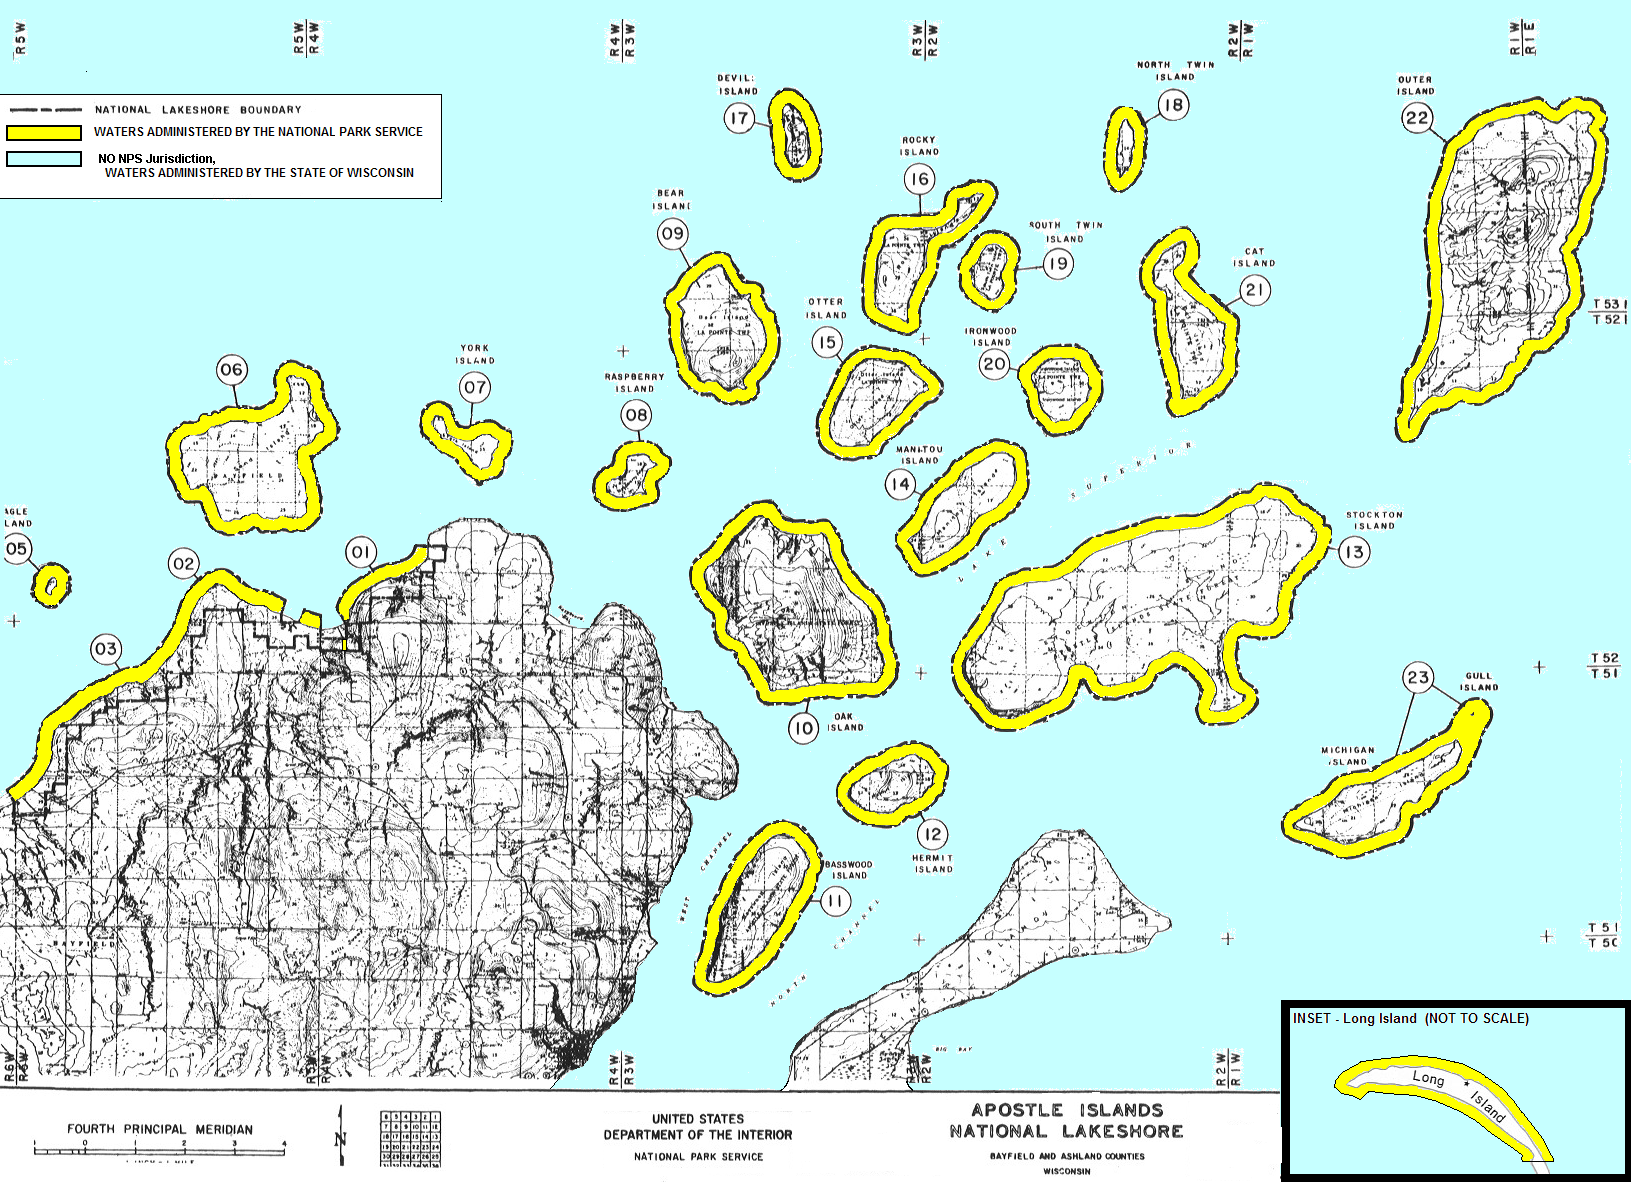 aerial view of islands highlighted in yellow showing waters under the jurisdiction of the NPS